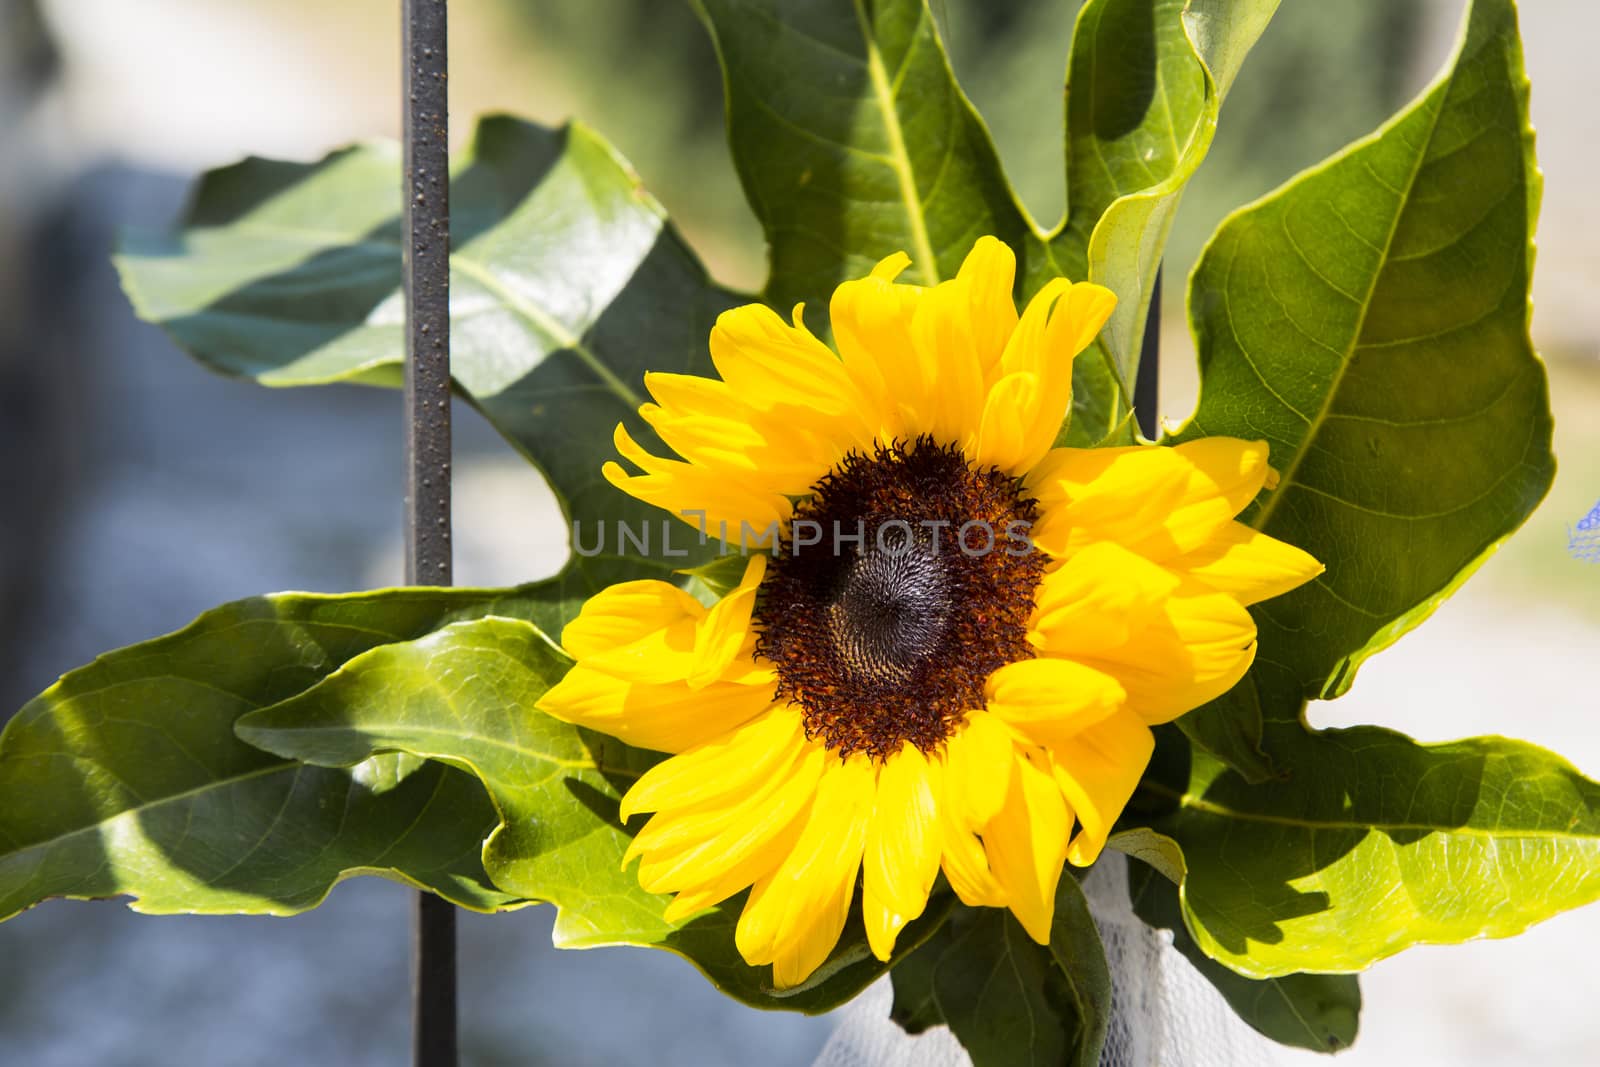 Close up view of a sunflower mounted on an iron gate